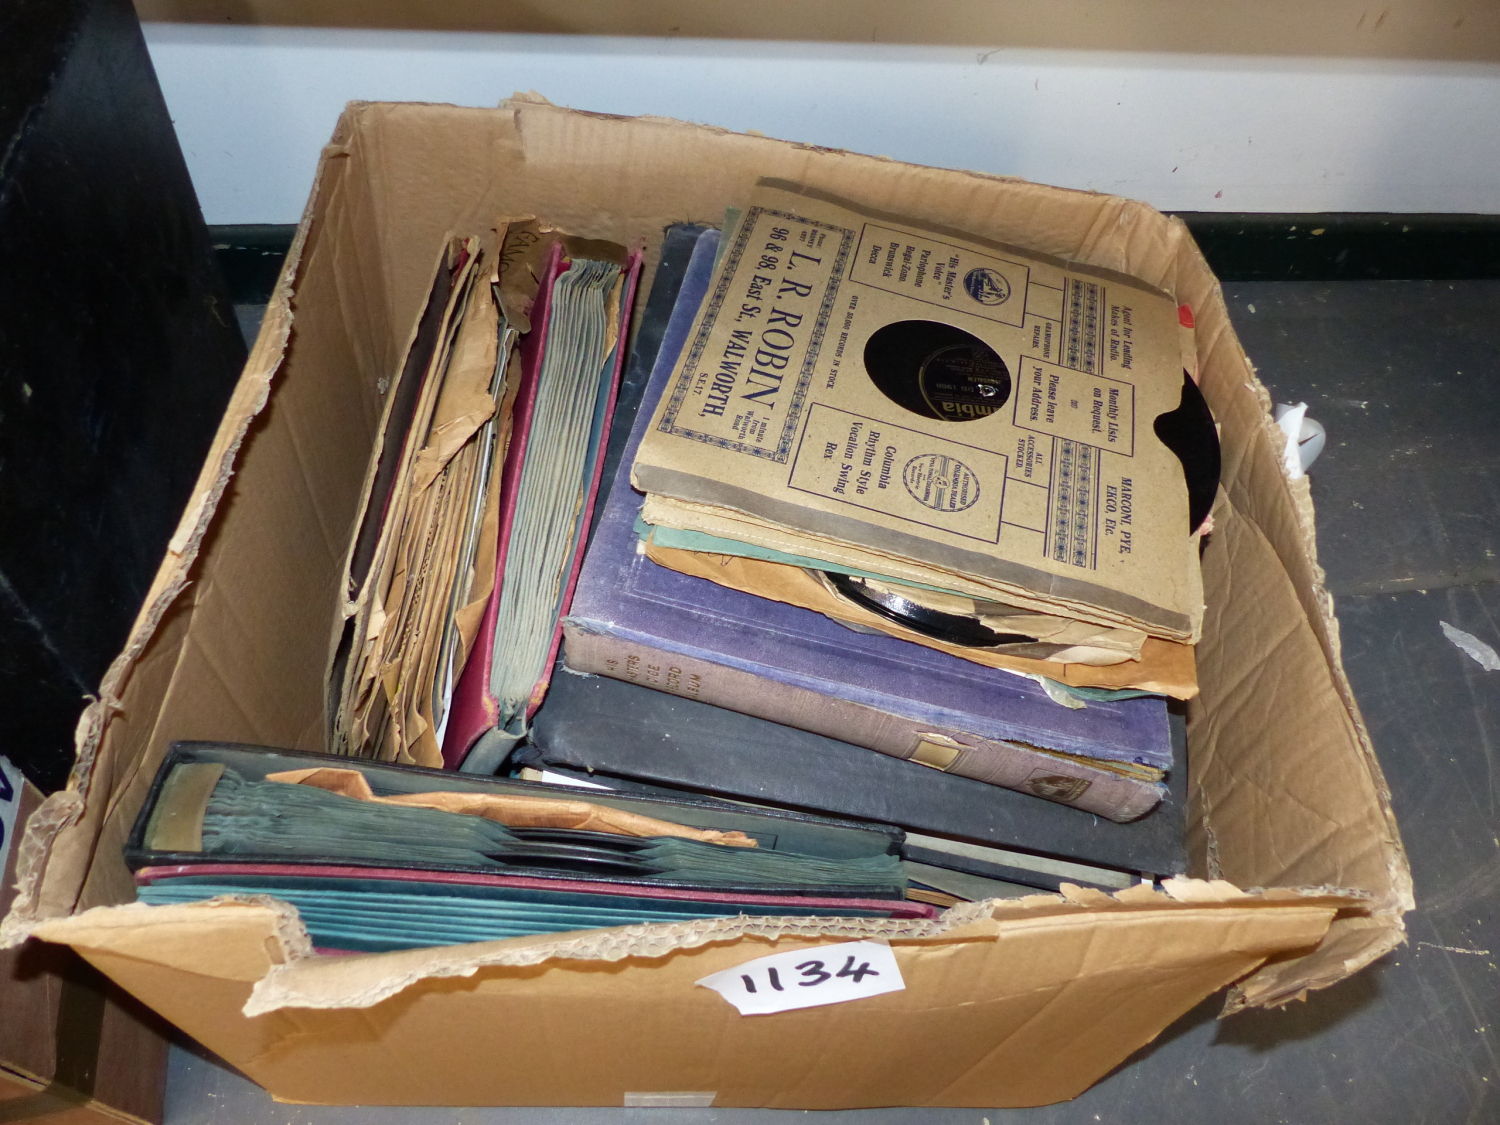 A QUANTITY OF 78 RPM RECORDS. - Image 2 of 5